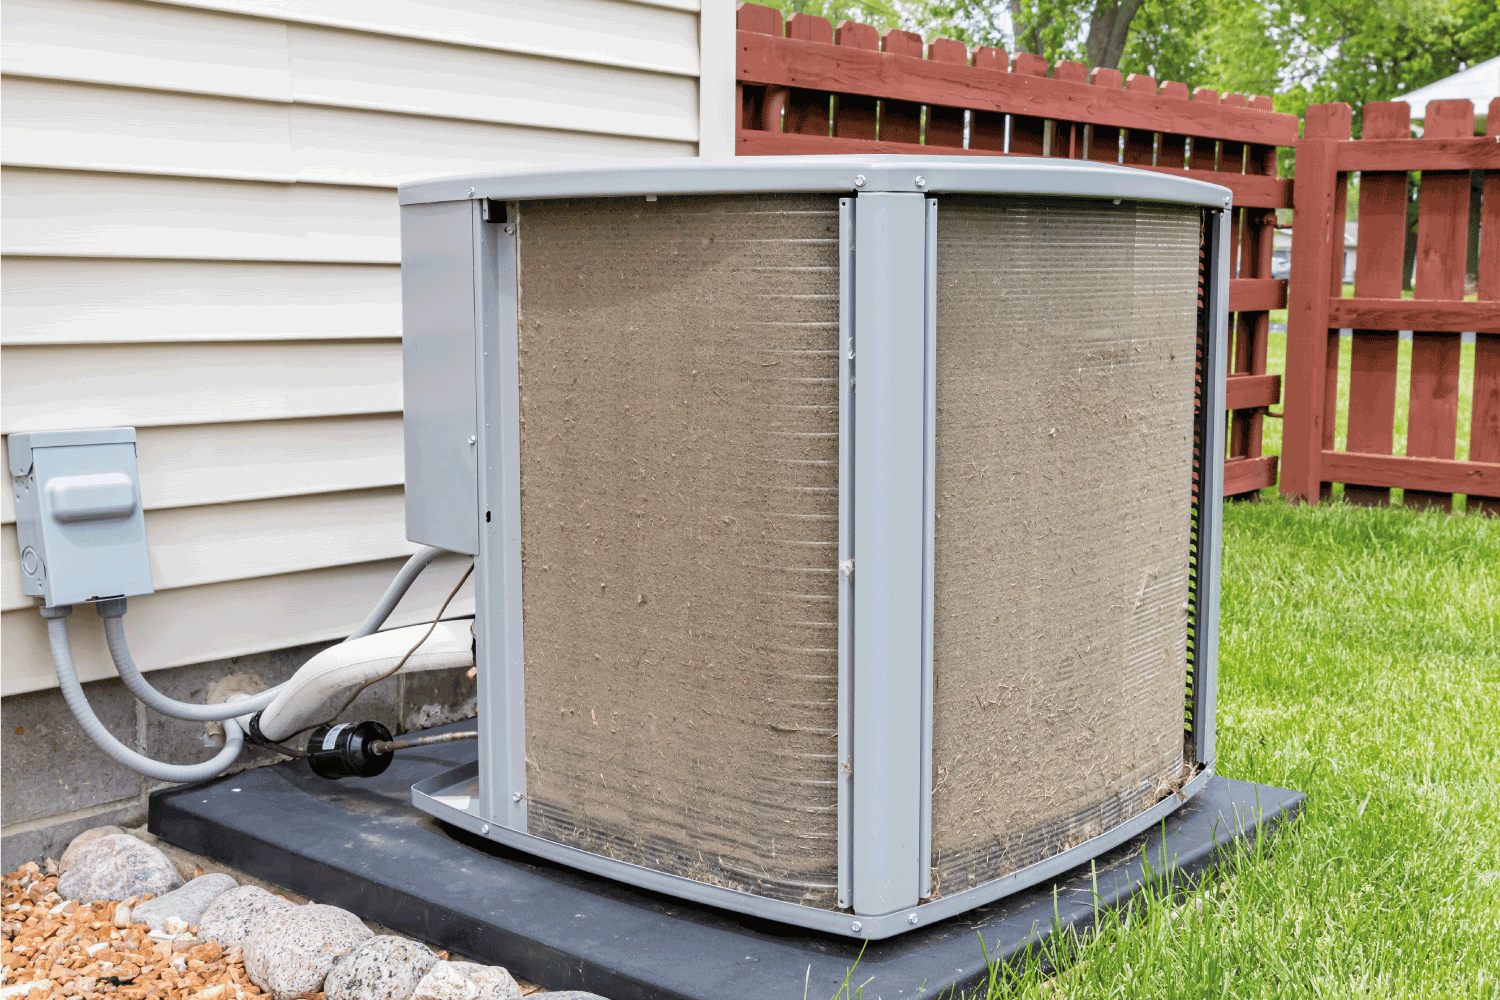 Dirty air conditioning condenser unit. Condenser coil full of dirt and grass debris